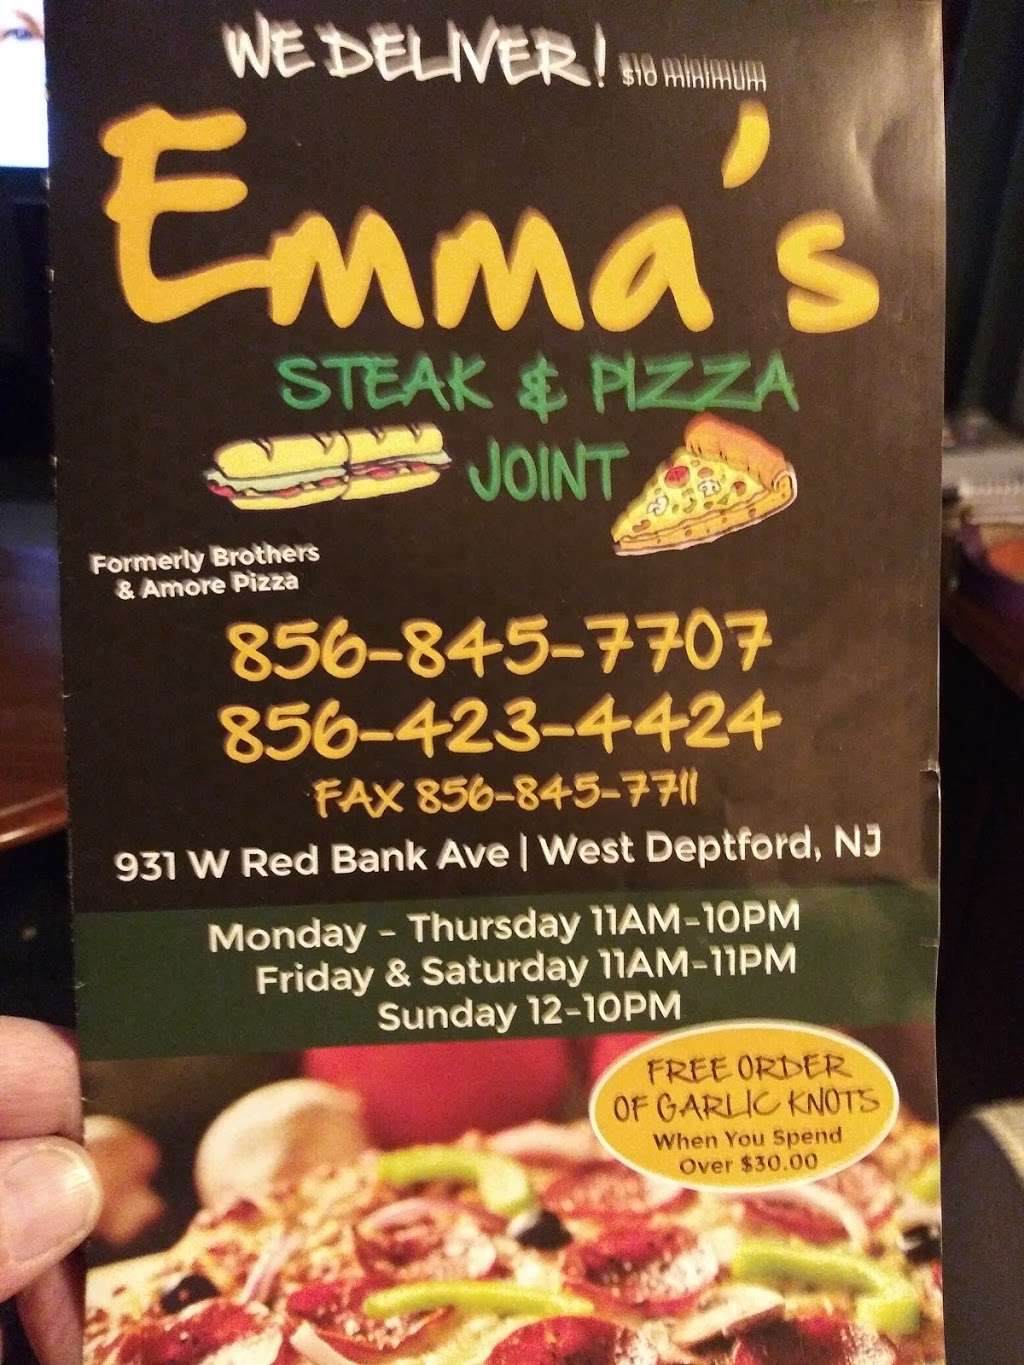 Emmas Steak and Pizza Joint | 931 W Red Bank Ave, West Deptford, NJ 08096 | Phone: (856) 845-7707